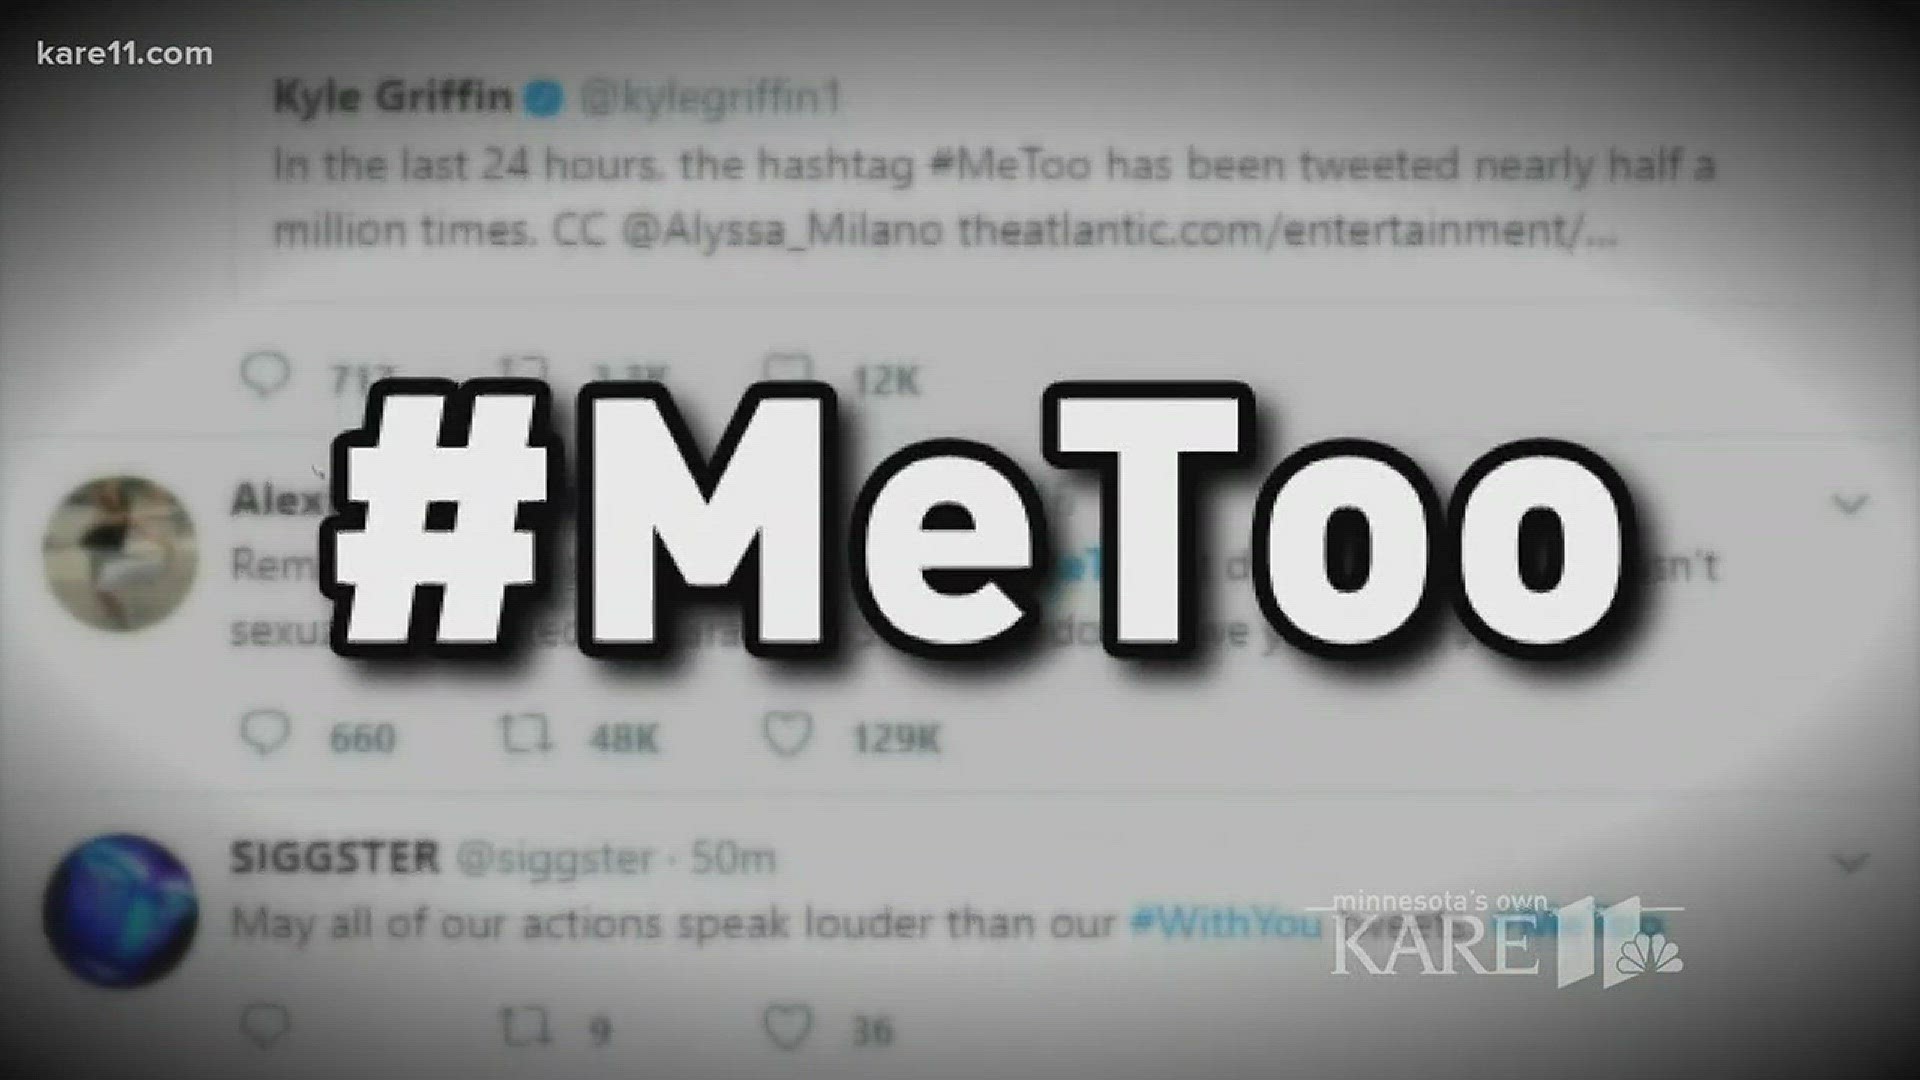 In less than 48 hours one million people, in 100 languages, from all over the world, have joined in that hashtag moment simply by adding their name to the list or by sharing their story. #MeToo. http://kare11.tv/2iiIbz1